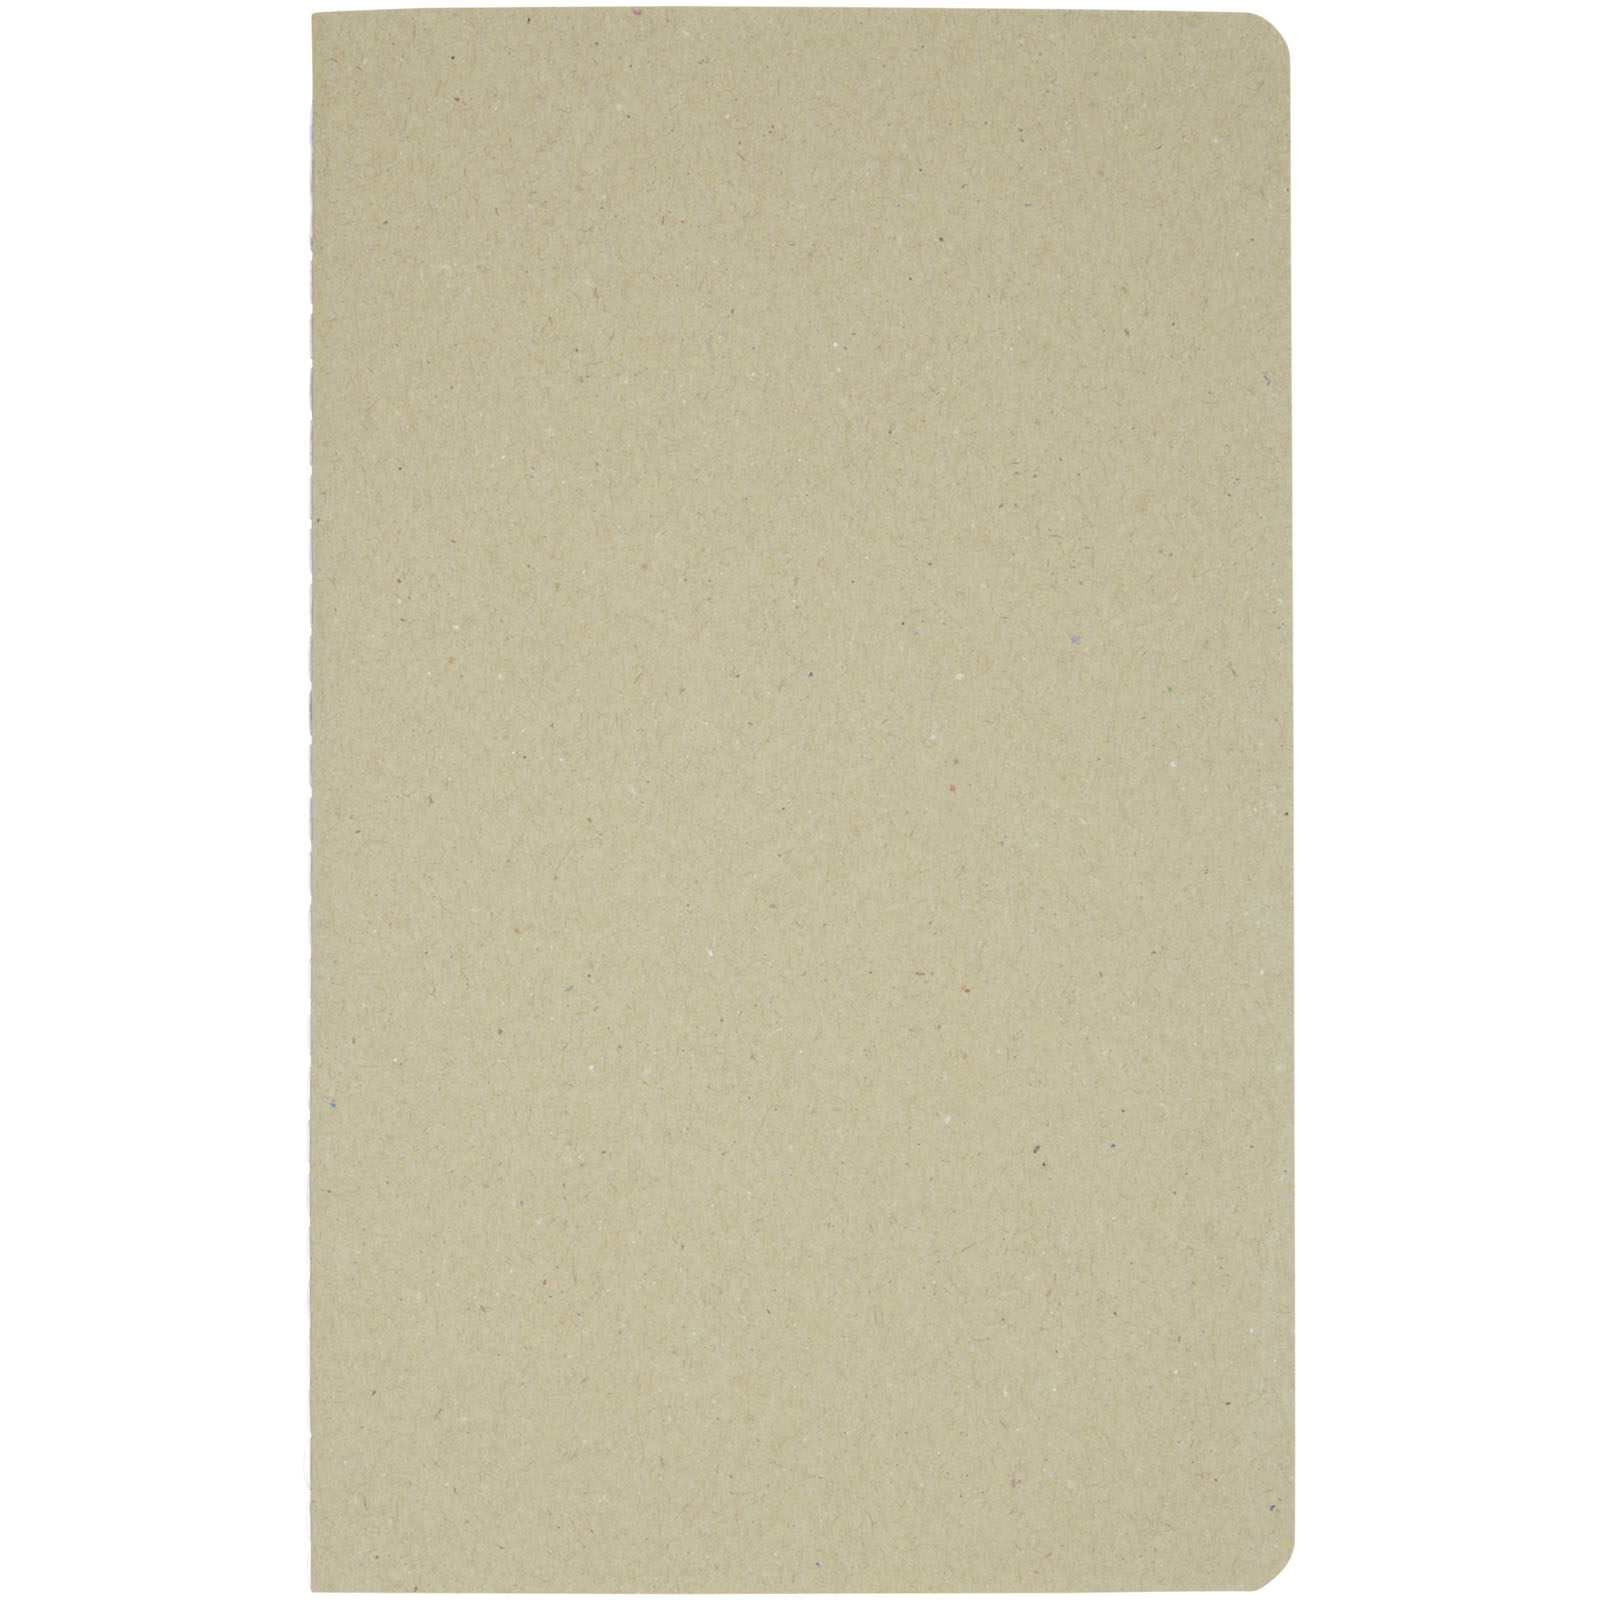 Advertising Notebooks - Gianna recycled cardboard notebook - 1